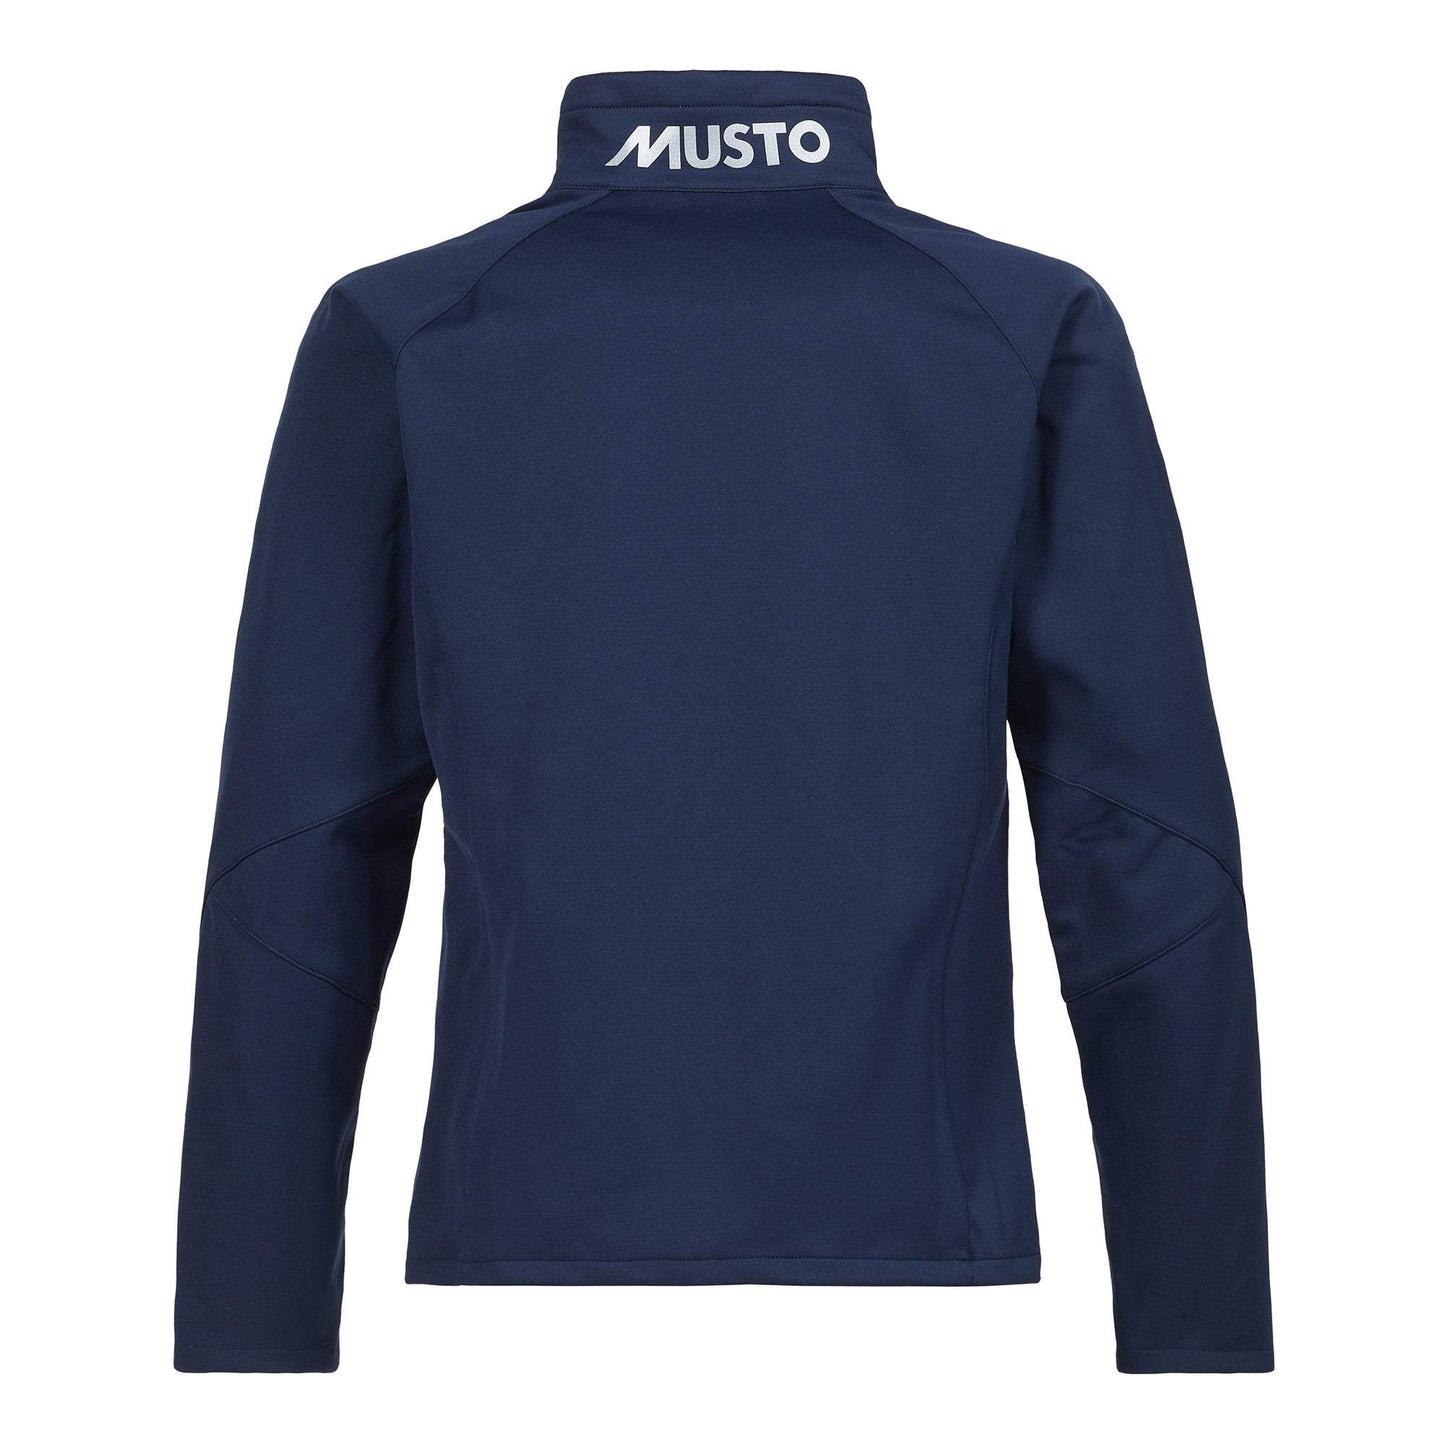 Women's Essential Softshell Jacket by Musto